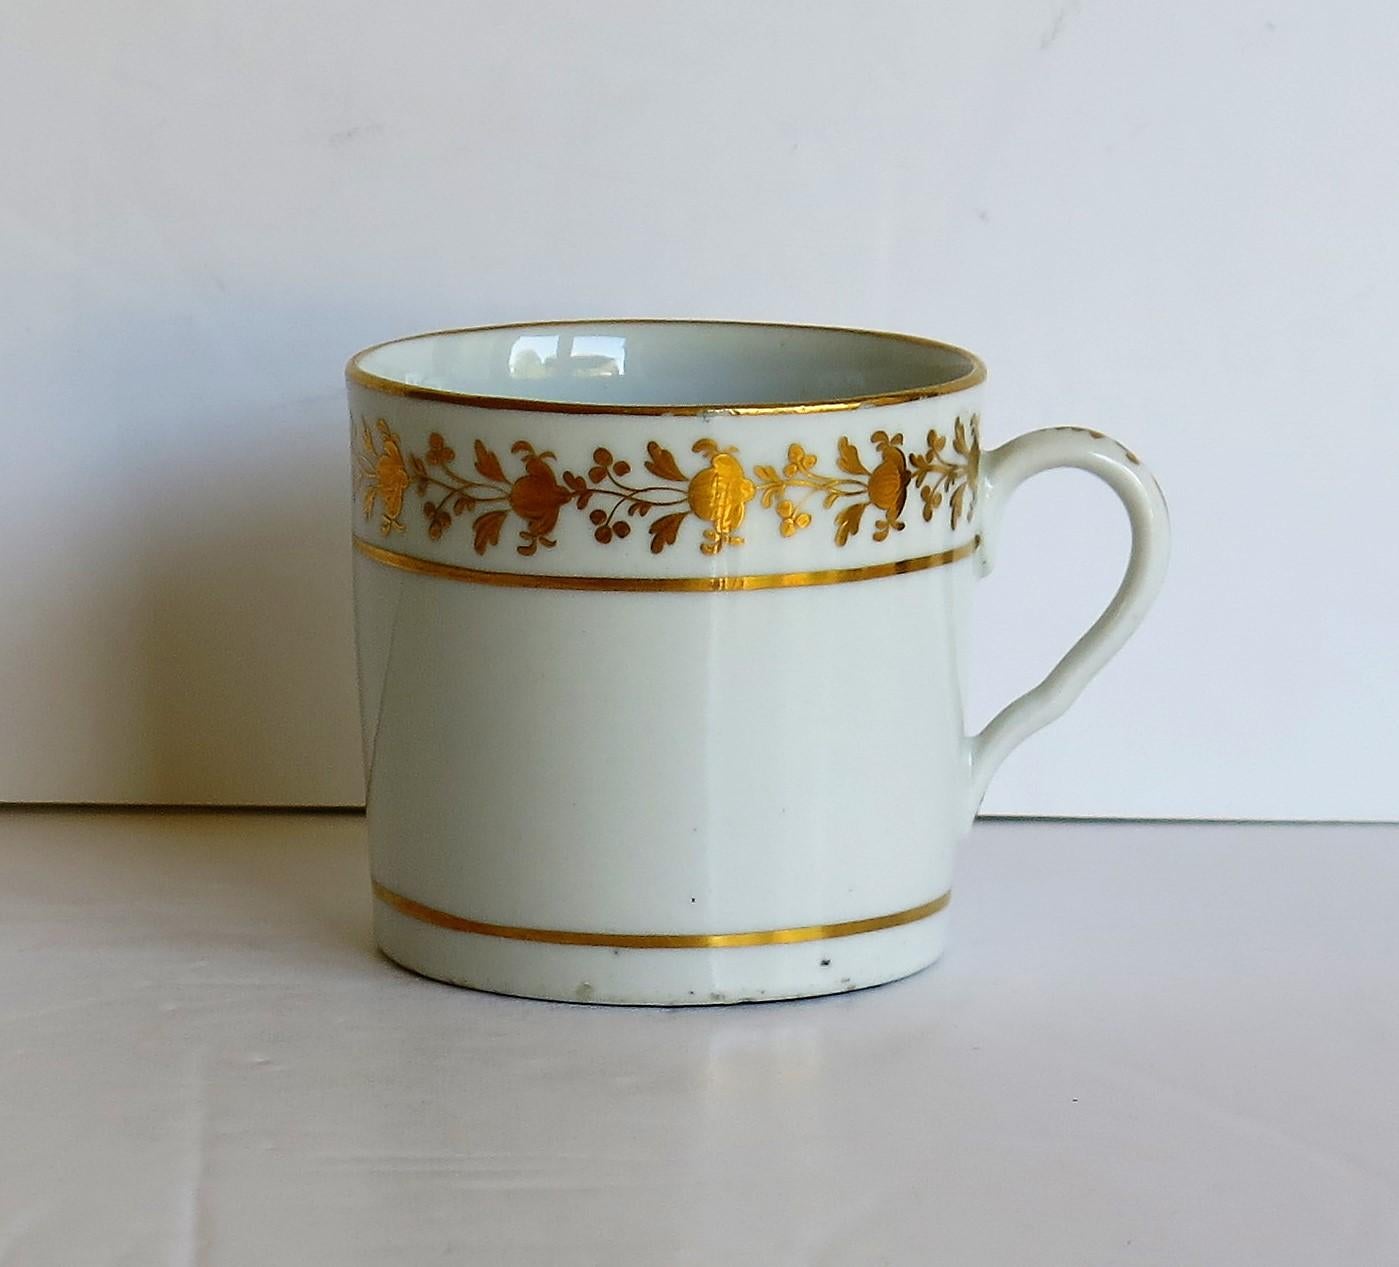 This is a good quality coffee can that we attribute to the Coalport Porcelain works, Shropshire, England, made during the John Rose period of the George 111rd years, circa 1805-1810.

The coffee can is nominally parallel, tapering slightly to the